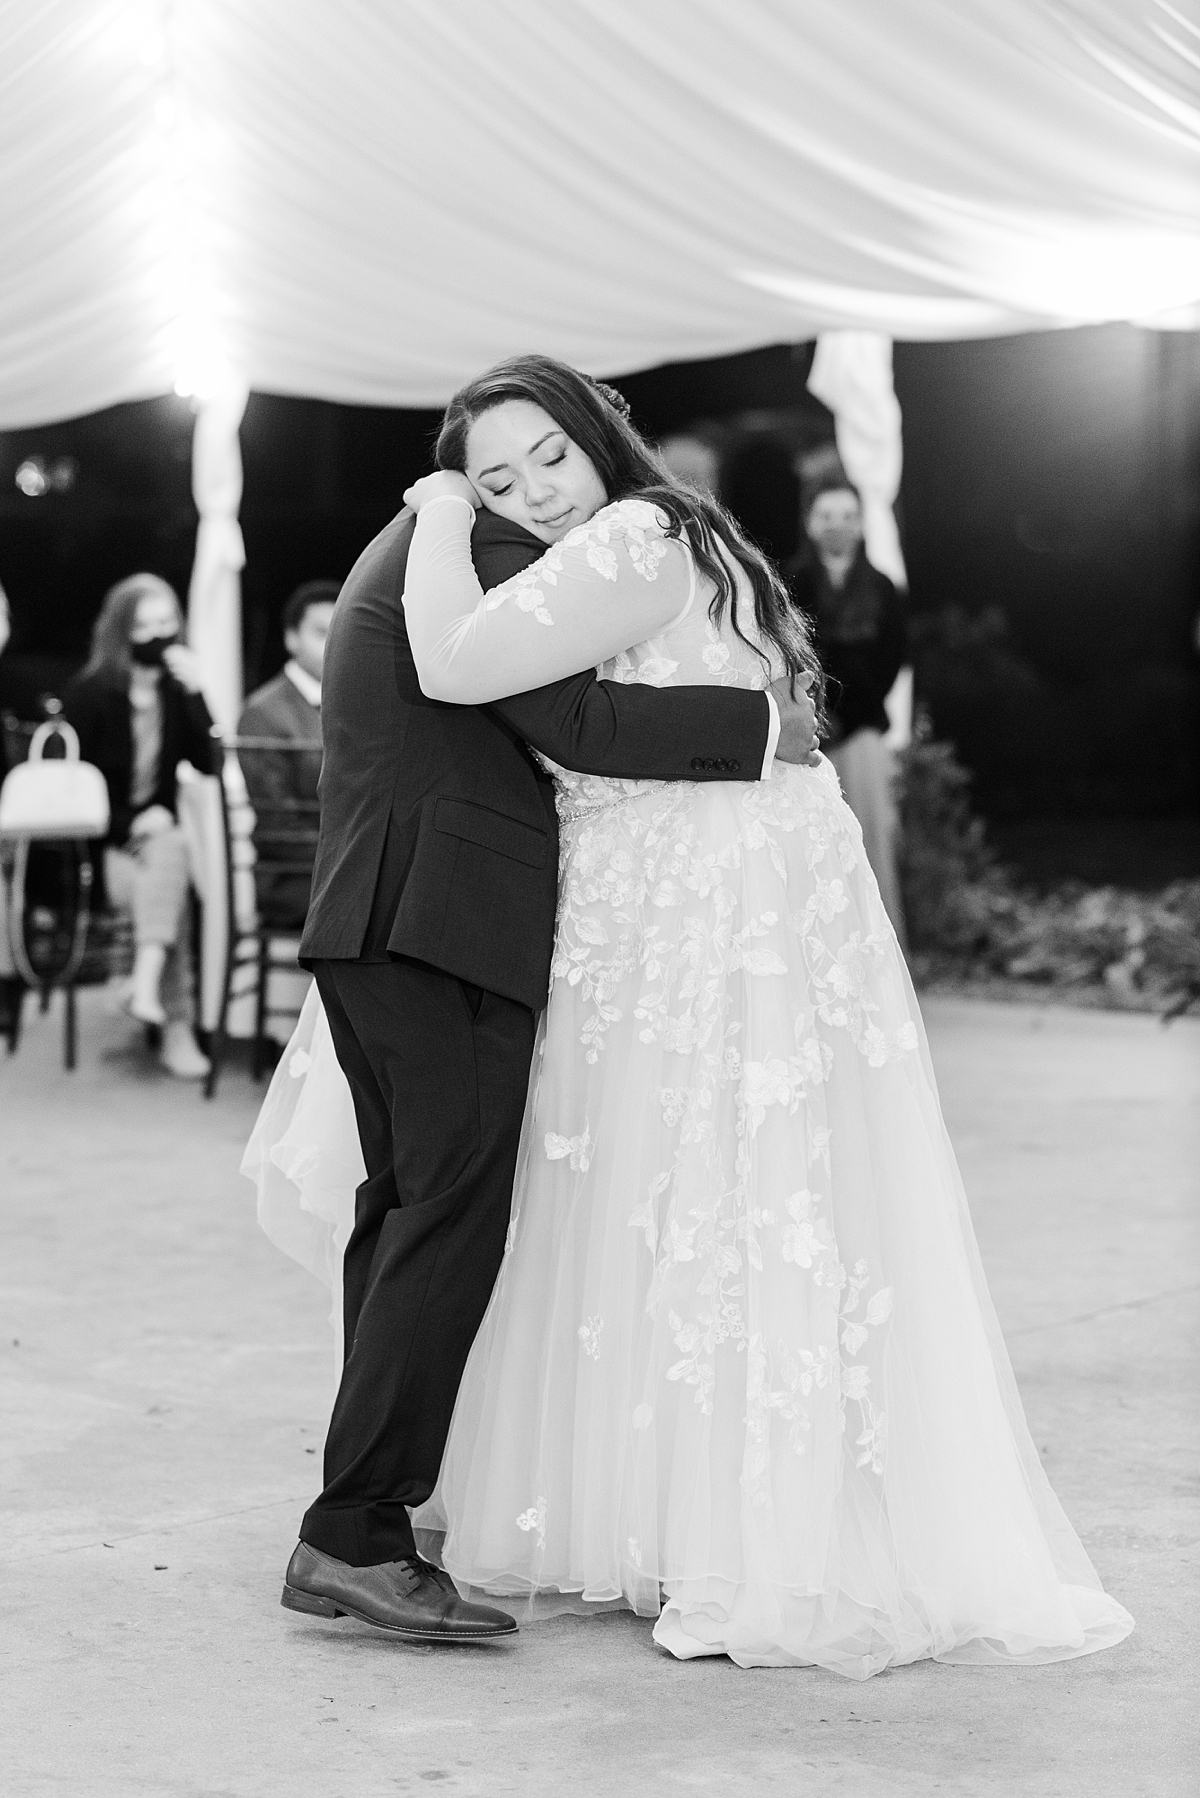 Bride and Groom First Dance at Virginia Cliffe Inn Wedding Reception. Wedding Photography by Richmond Wedding Photographer Kailey Brianne Photography.